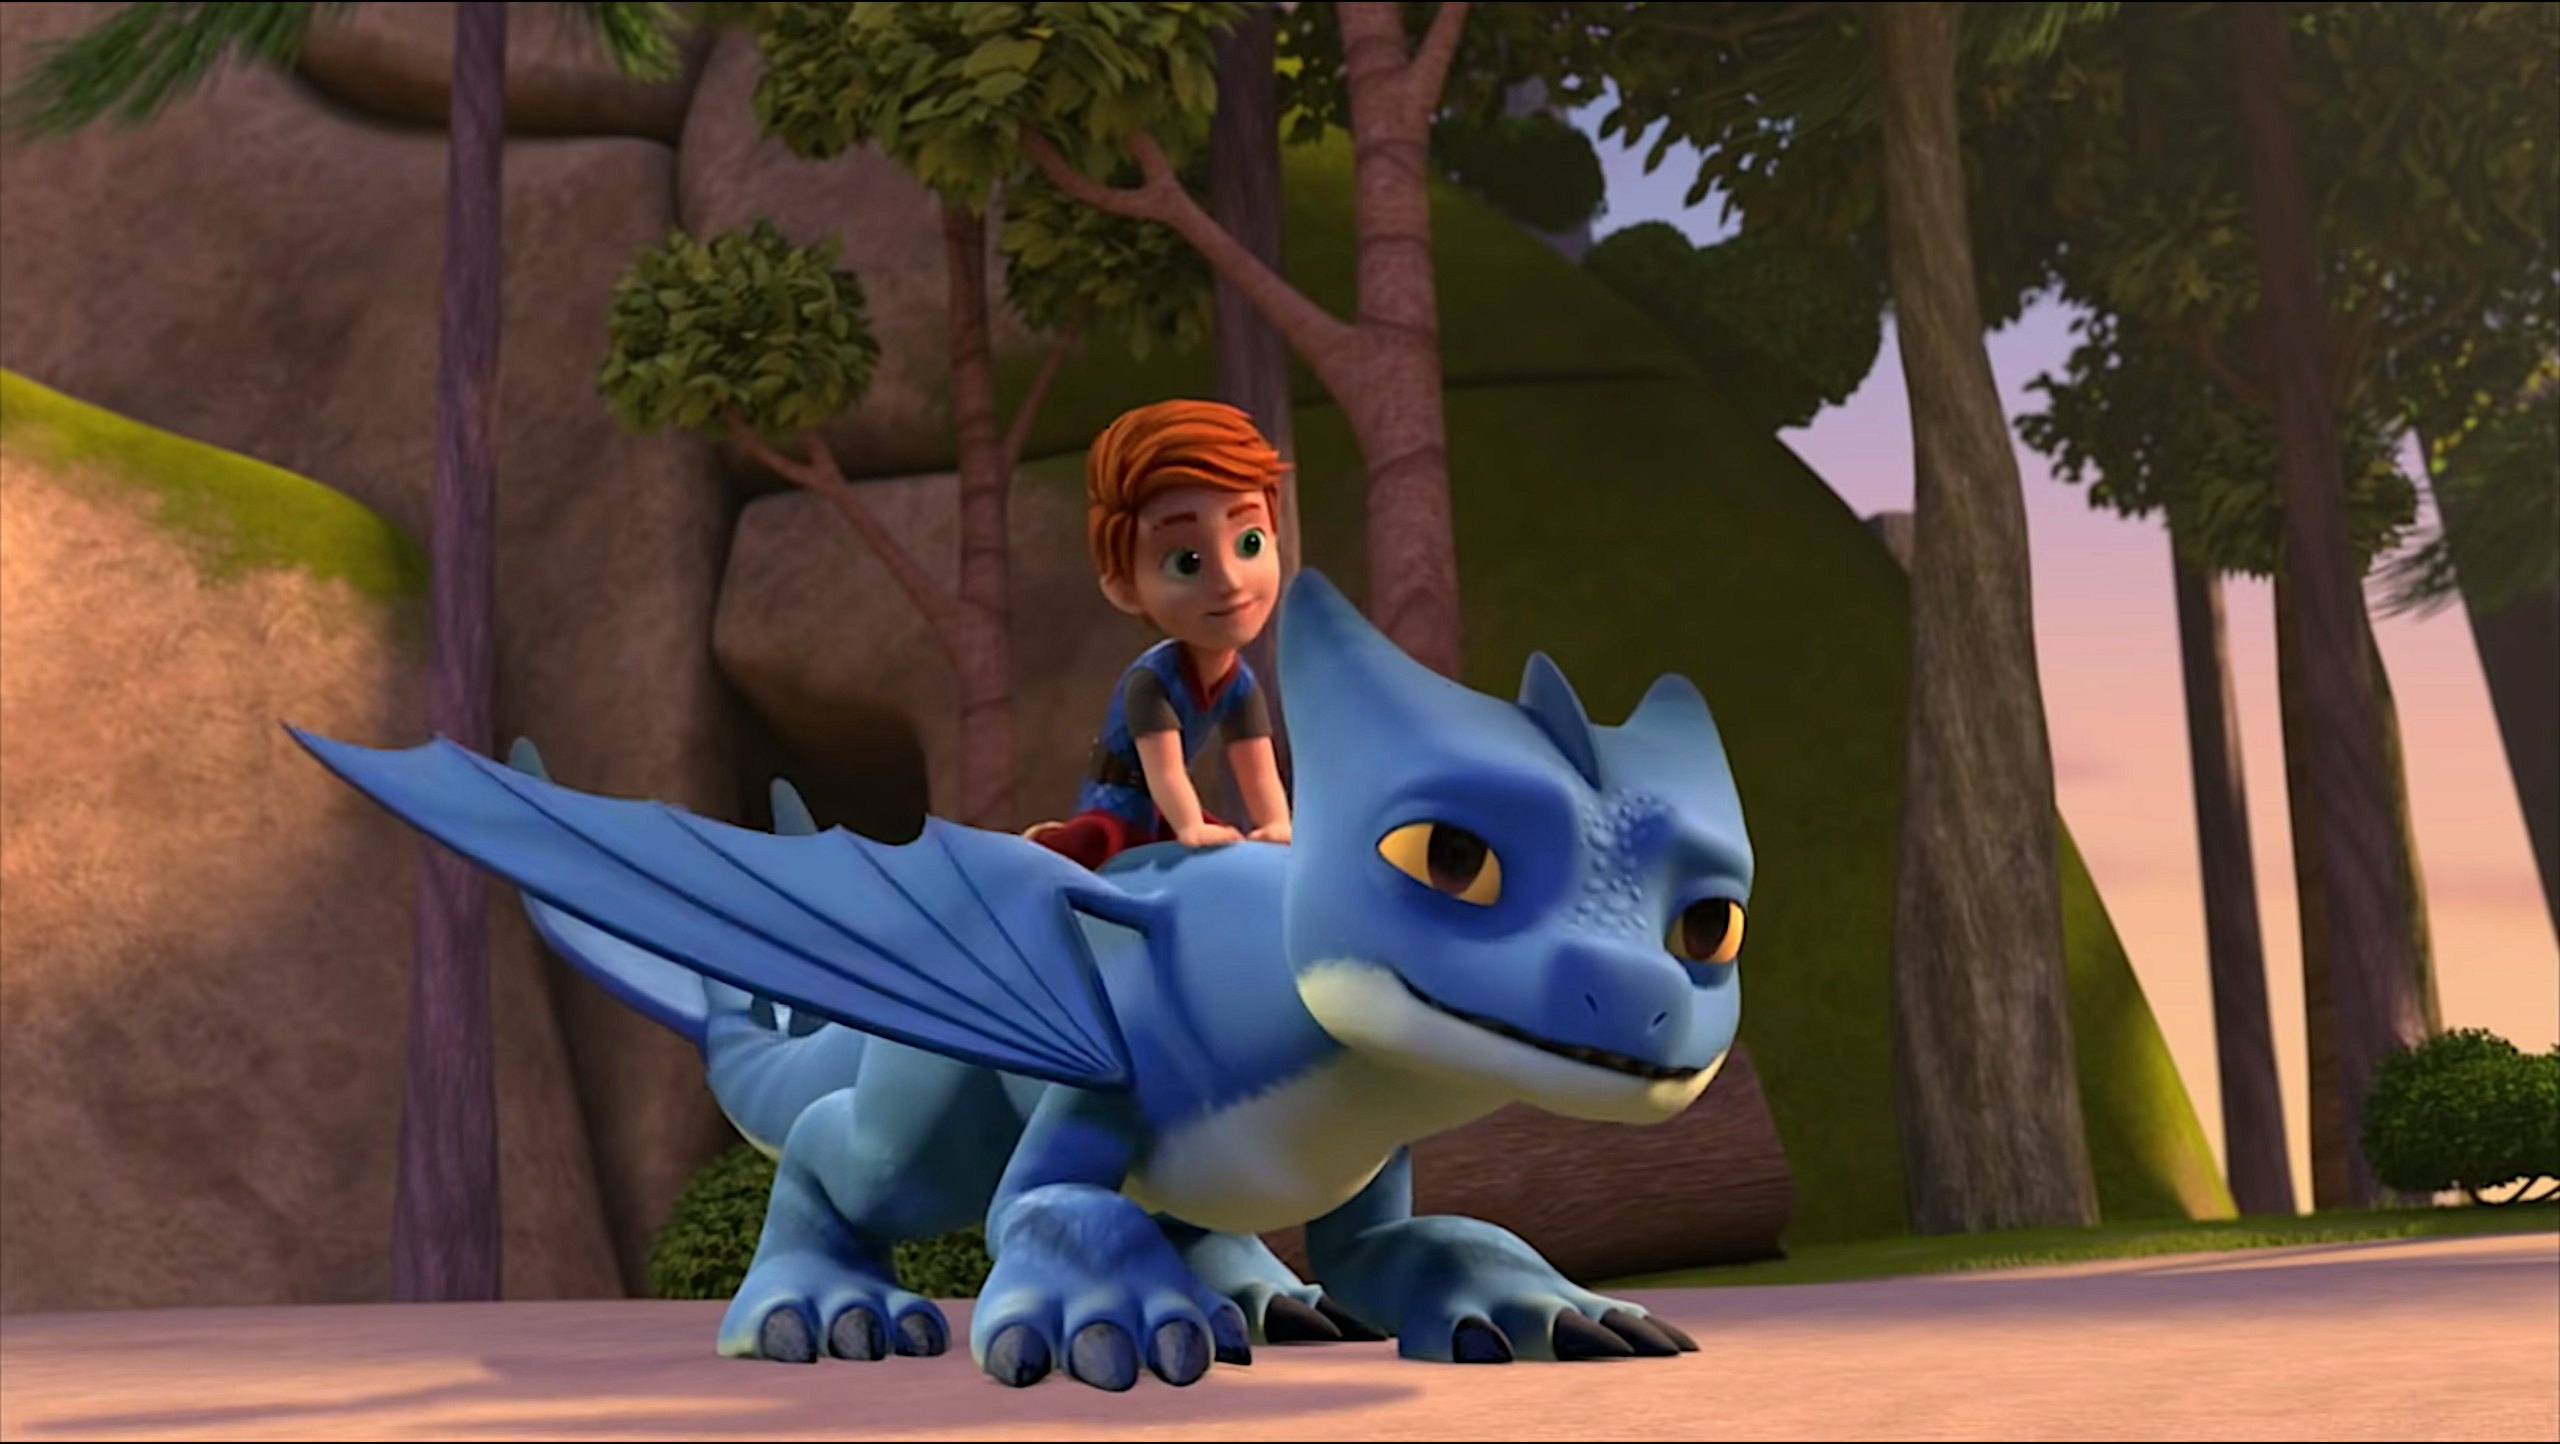 Exclusive Look At DreamWorks' New 'Dragons Rescue Riders' Show